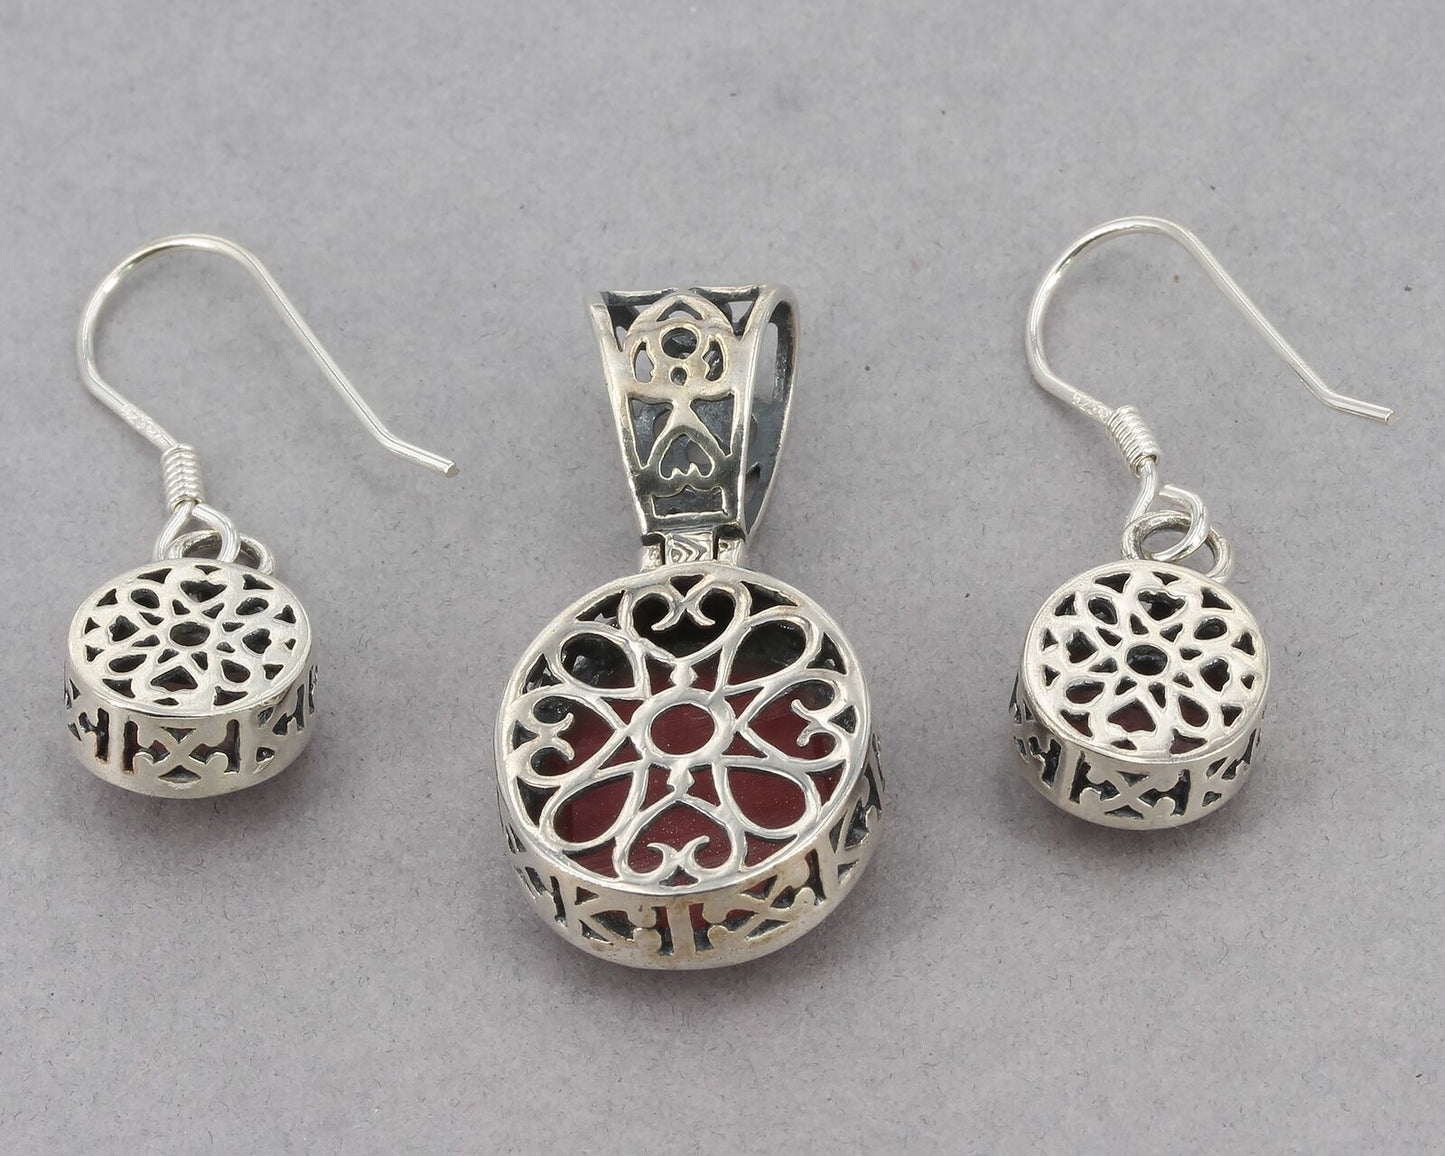 Retired Silpada Sterling Silver Oval Red Inlay Pendant Earrings Set S1300 W1298